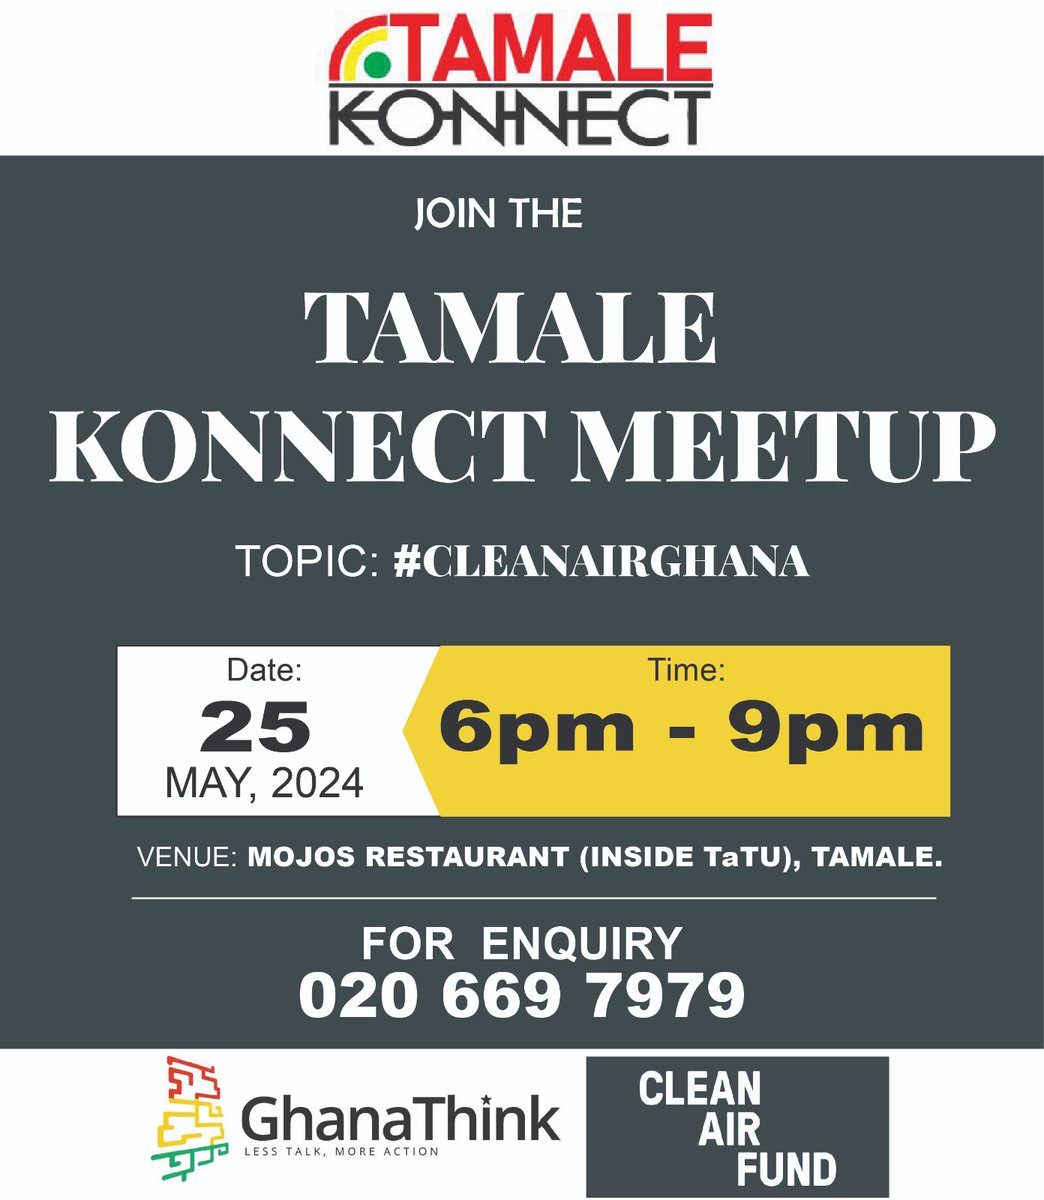 Join the Tamale Konnect Meetup Topic: #CleanAirGhana Date: Saturday, 25th May, 2024 Time: 6-9pm Venue: Mojos Bar, Tamale #TamaleKonnect Social Media: Barcamp Tamale Facebook Event: web.facebook.com/events/7774754… Google Maps: maps.app.goo.gl/3kQUyZ9icS13Jp… #bctamale cc @Ziyyakartu @Tamale_Ghana